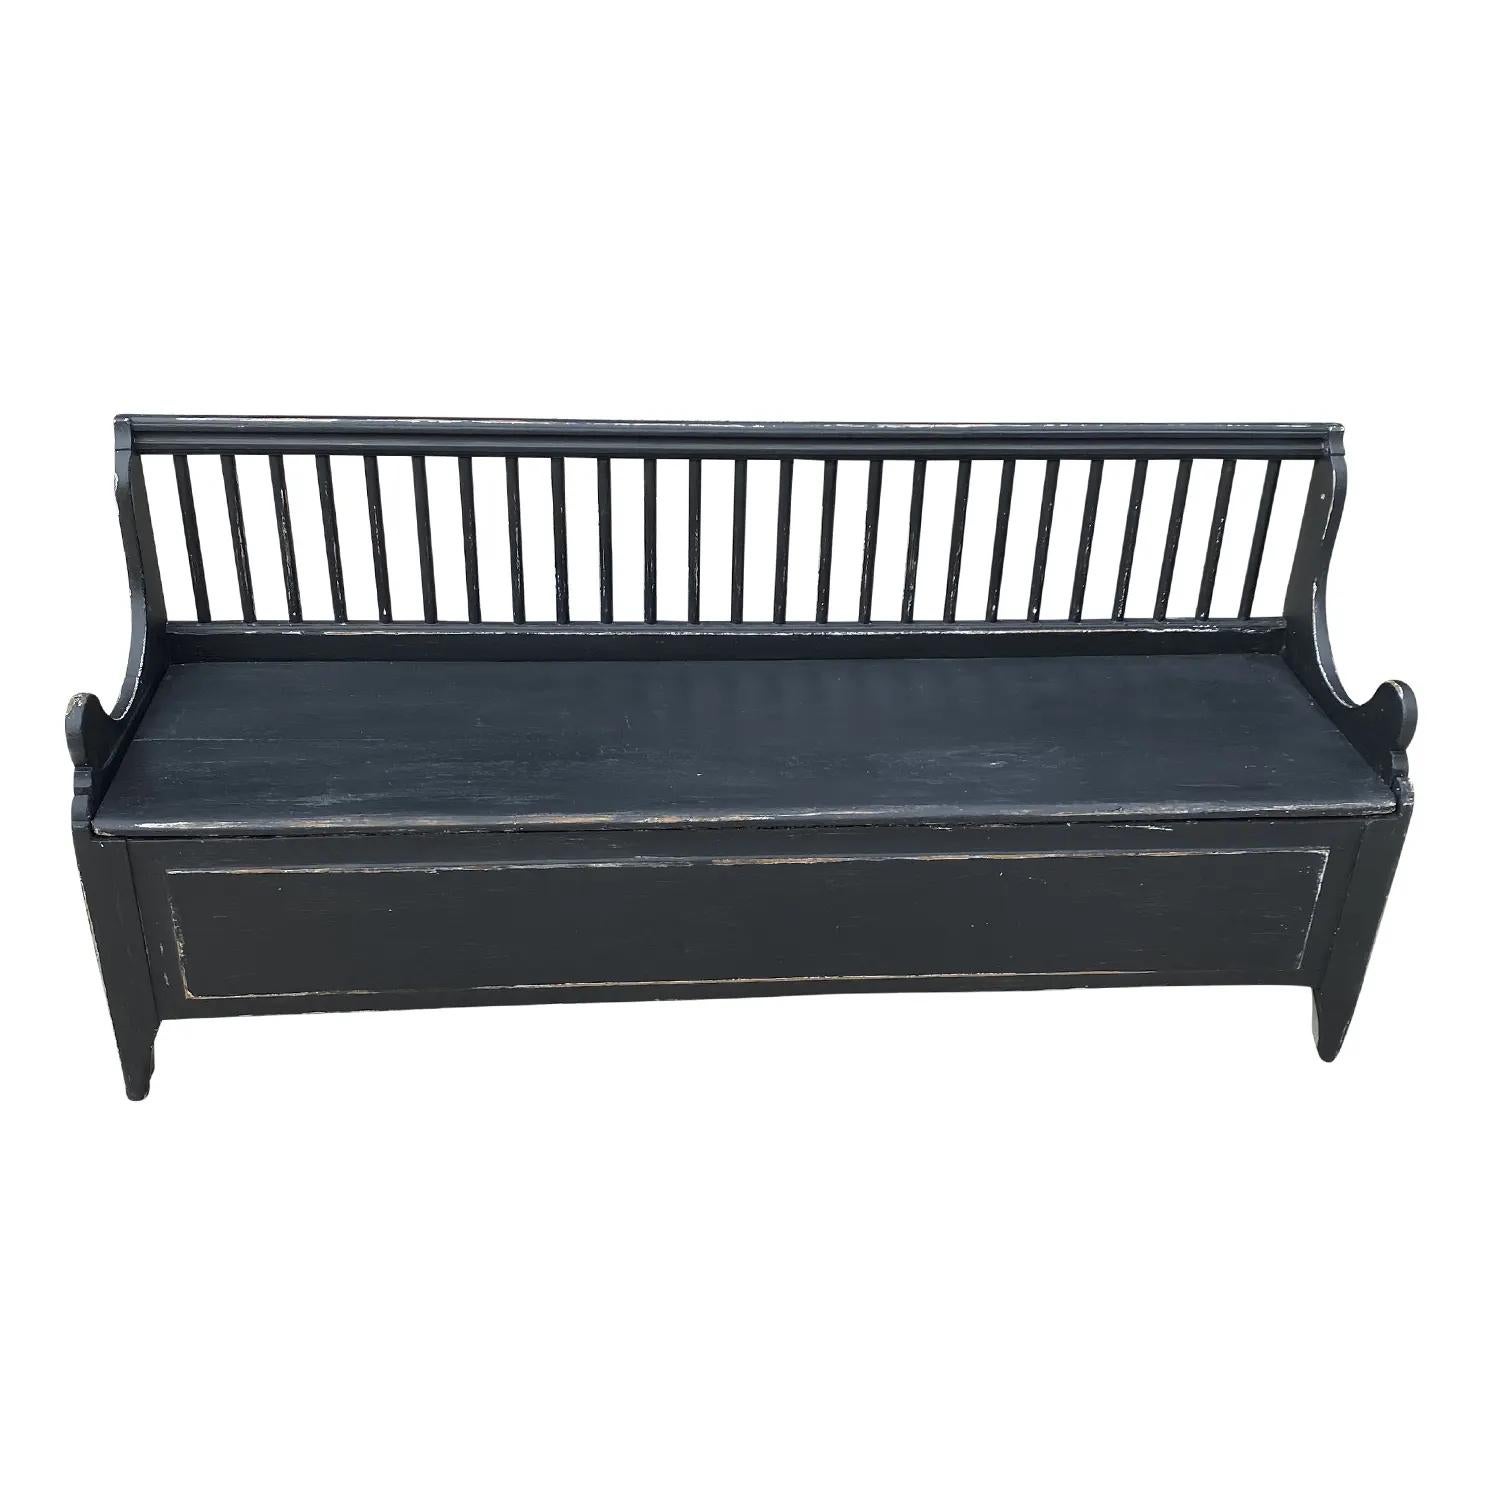 A black, antique Swedish Gustavian FÅLLBÄNK, fall bench composed with a storage space below sitting area, made of hand crafted painted Pinewood, in good condition. The back rest of the Scandinavian wood bench is spindled with small, arched armrests,